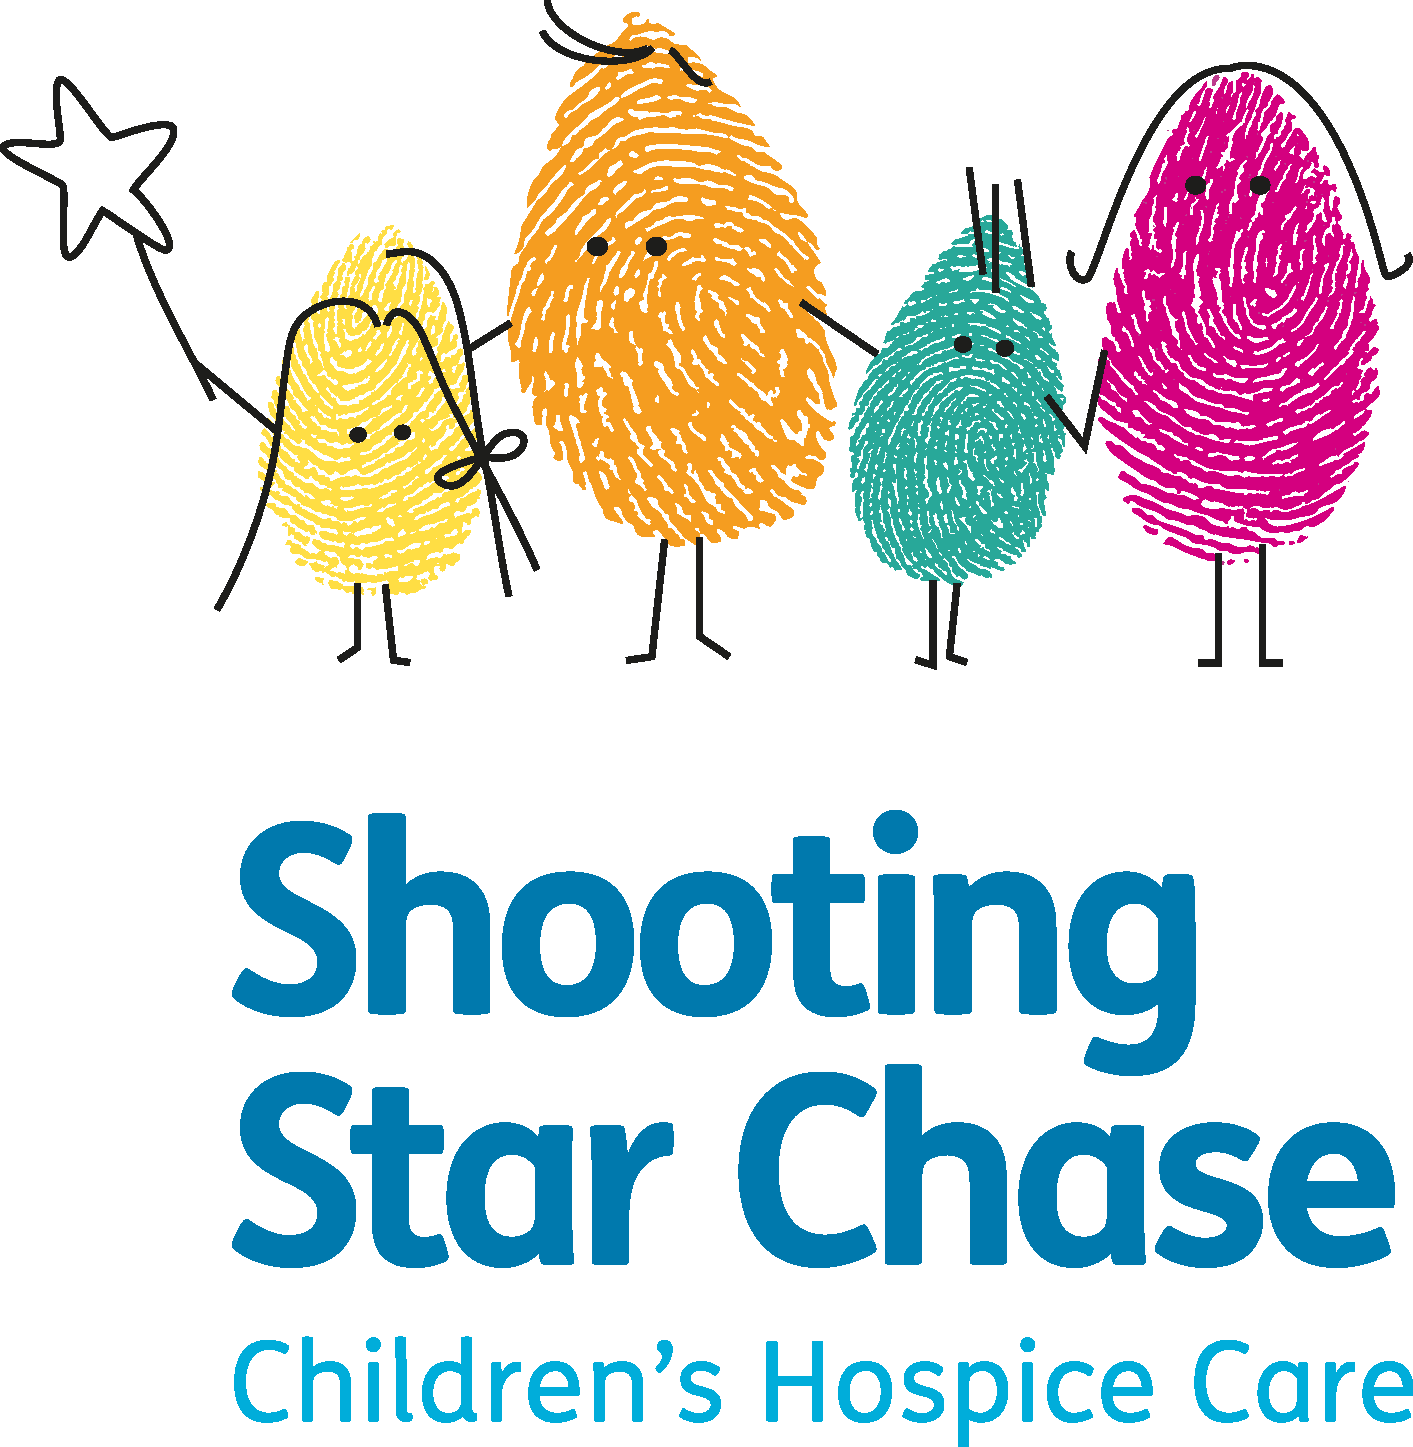 Shooting Star Chase Children's Hospice Care - Shooting Star Chase Hampton (1413x1447)